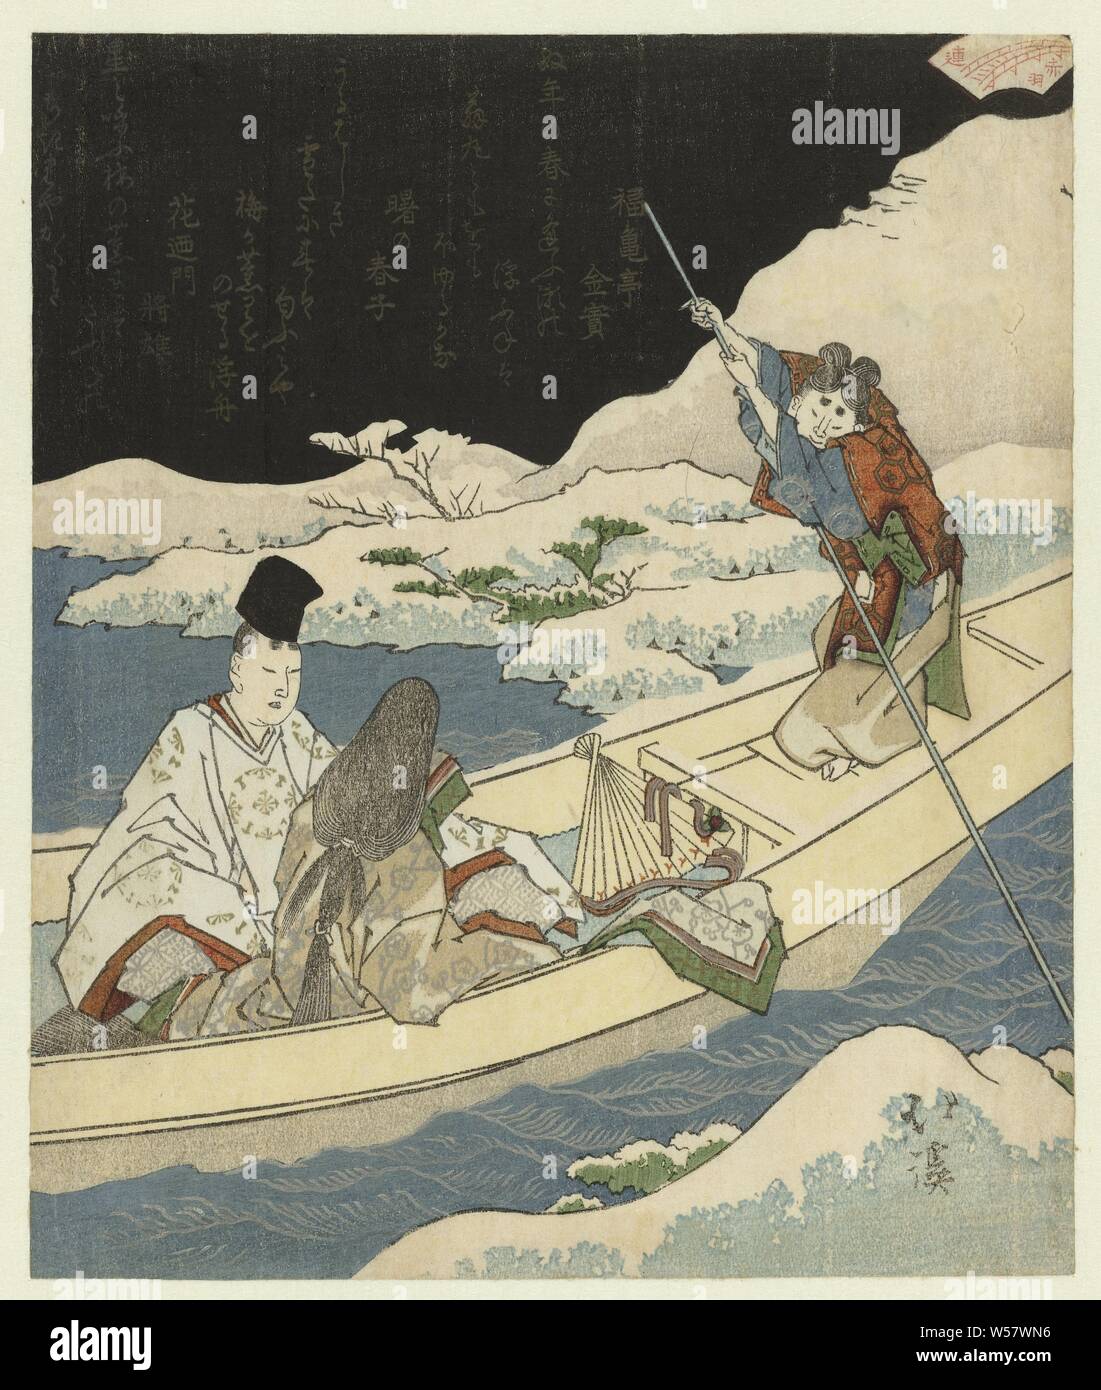 The nocturnal voyage, Court lady and nobleman on a nocturnal voyage through a snowy landscape. this scene refers to chapter 51 'Ukifune' from The Story of Genji. In this episode, the grandson of Genji, Prince Niou, runs away with the lady Ukifune one night. The story of Genji (Genji monogatari) was written in the Heian period (794-1185) by the maid of honor Murasaki Shikibu. With three poems, snow, Totoya Hokkei (mentioned on object), Japan, 1826, paper, colour woodcut, h 200 mm × w 168 mm Stock Photo